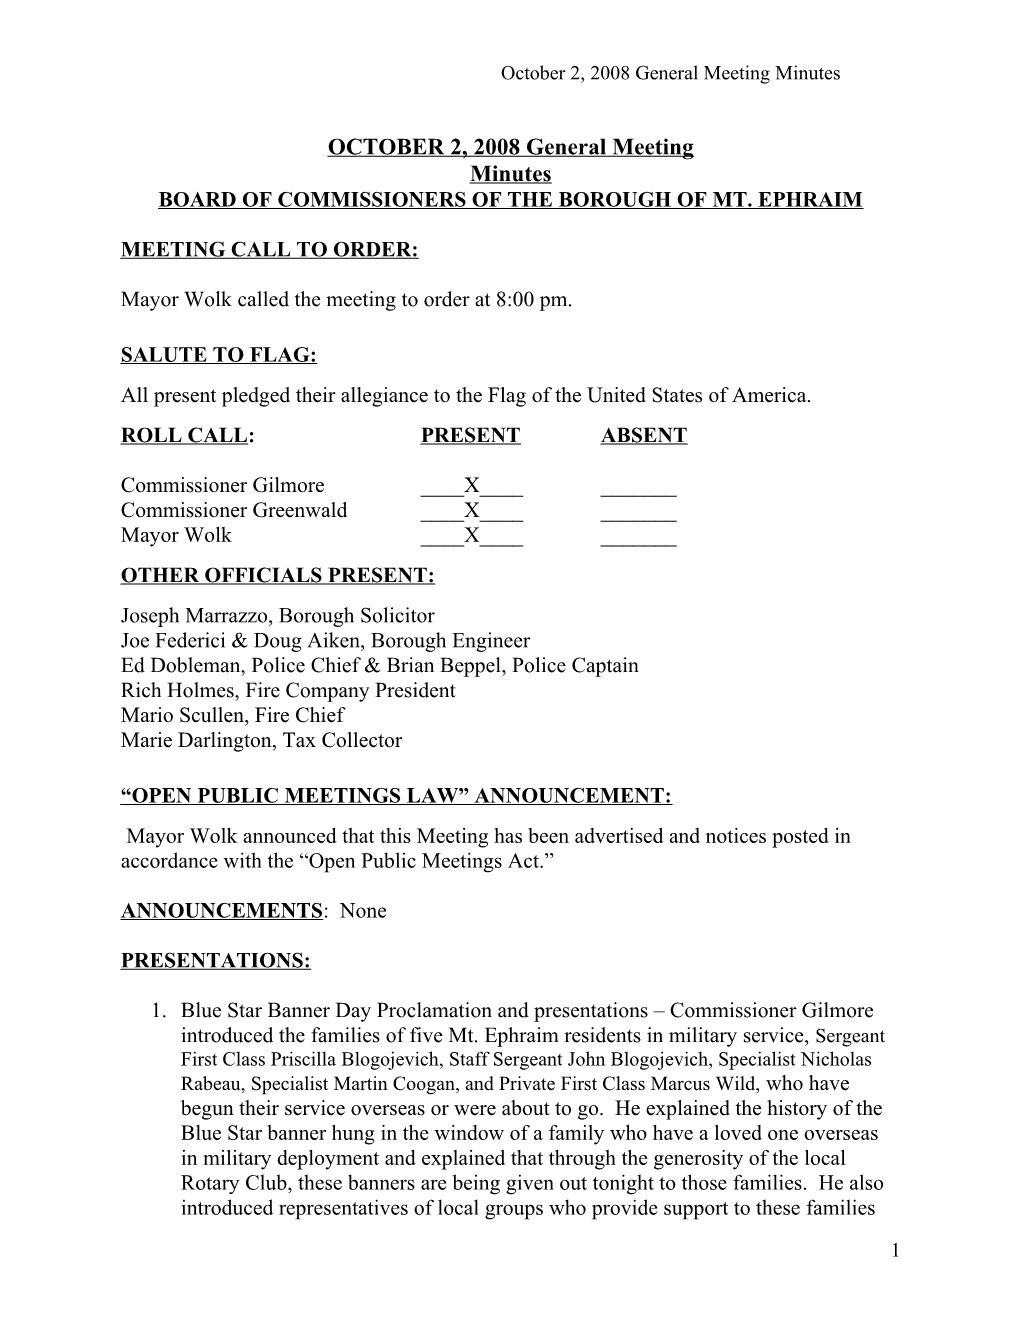 Agenda for the June 5, 2008 General Meeting of the Honorable Board of Commissioners Of